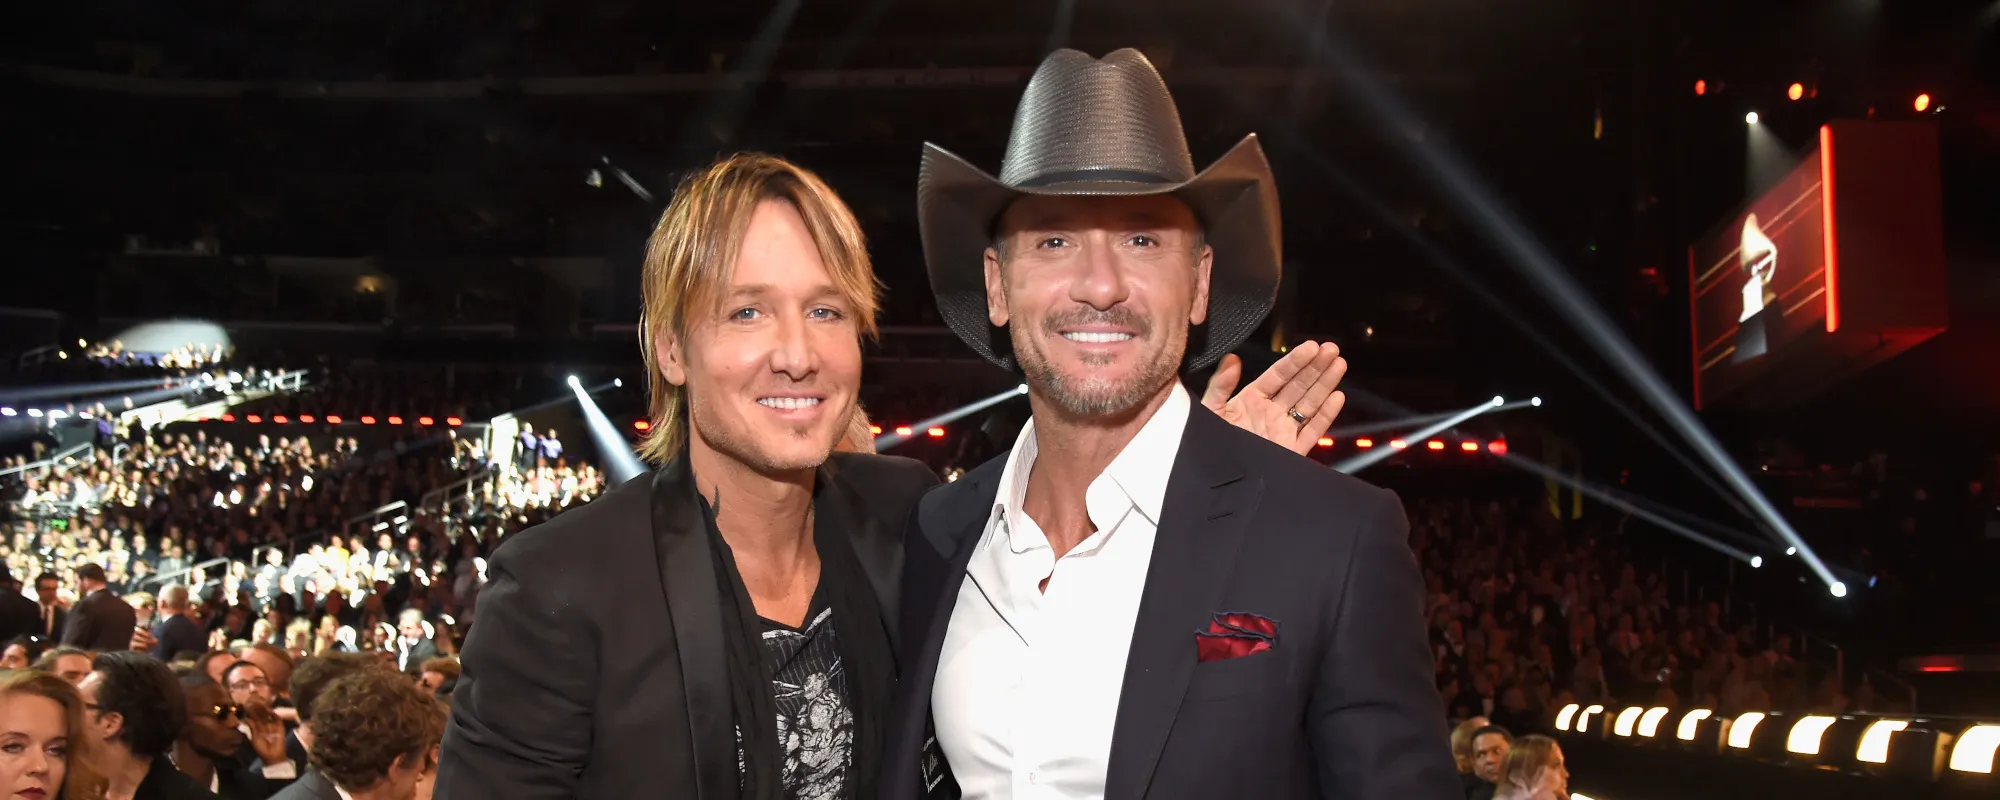 The Top 5 Male Country Artists of the 2000s